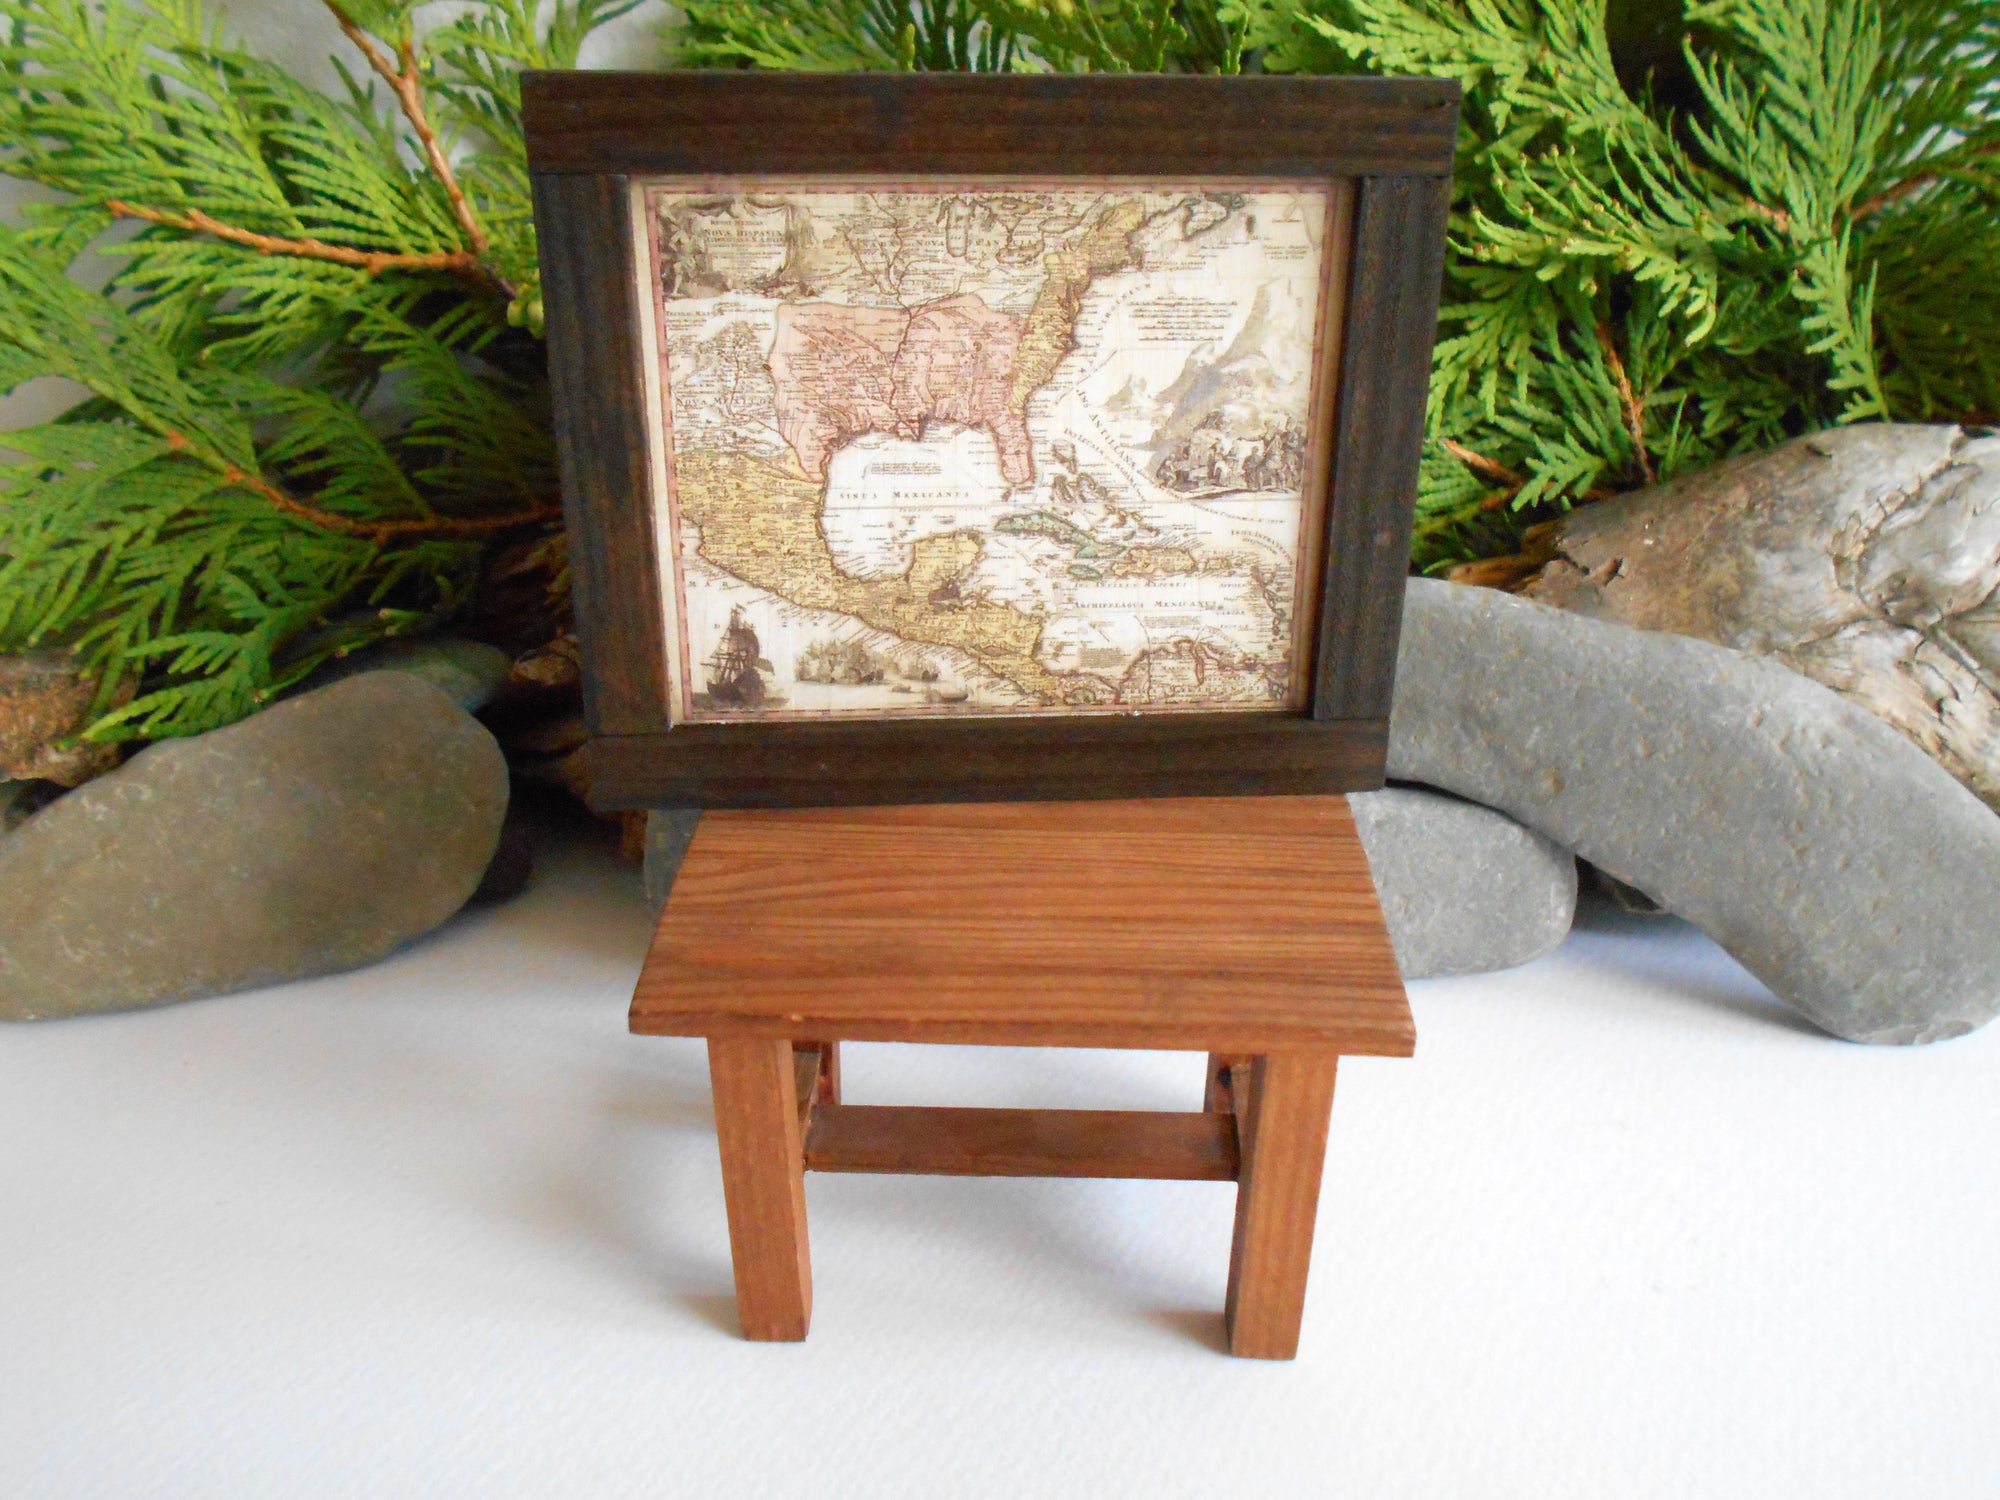 Miniature North America map framed with real pinewood- mini map artwork for dollhouse or for miniature collectors- handmade miniature dollhouse wall decor accessory